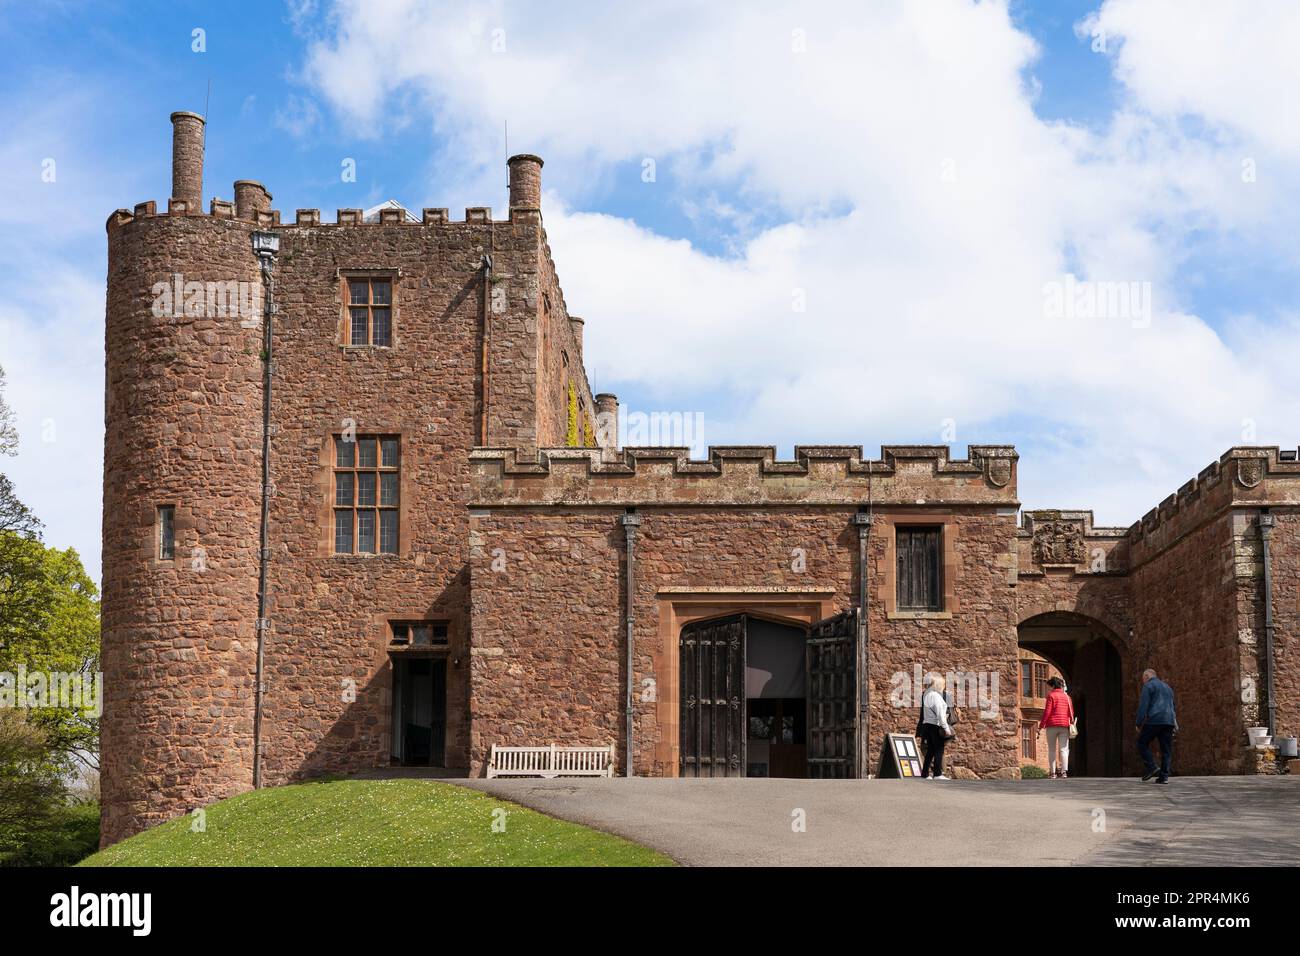 People entering the outer gatehouse entrance to Powis Castle, a Grade 1 listed sandstone medieval fortress and country house near Welshpool, Wales Stock Photo